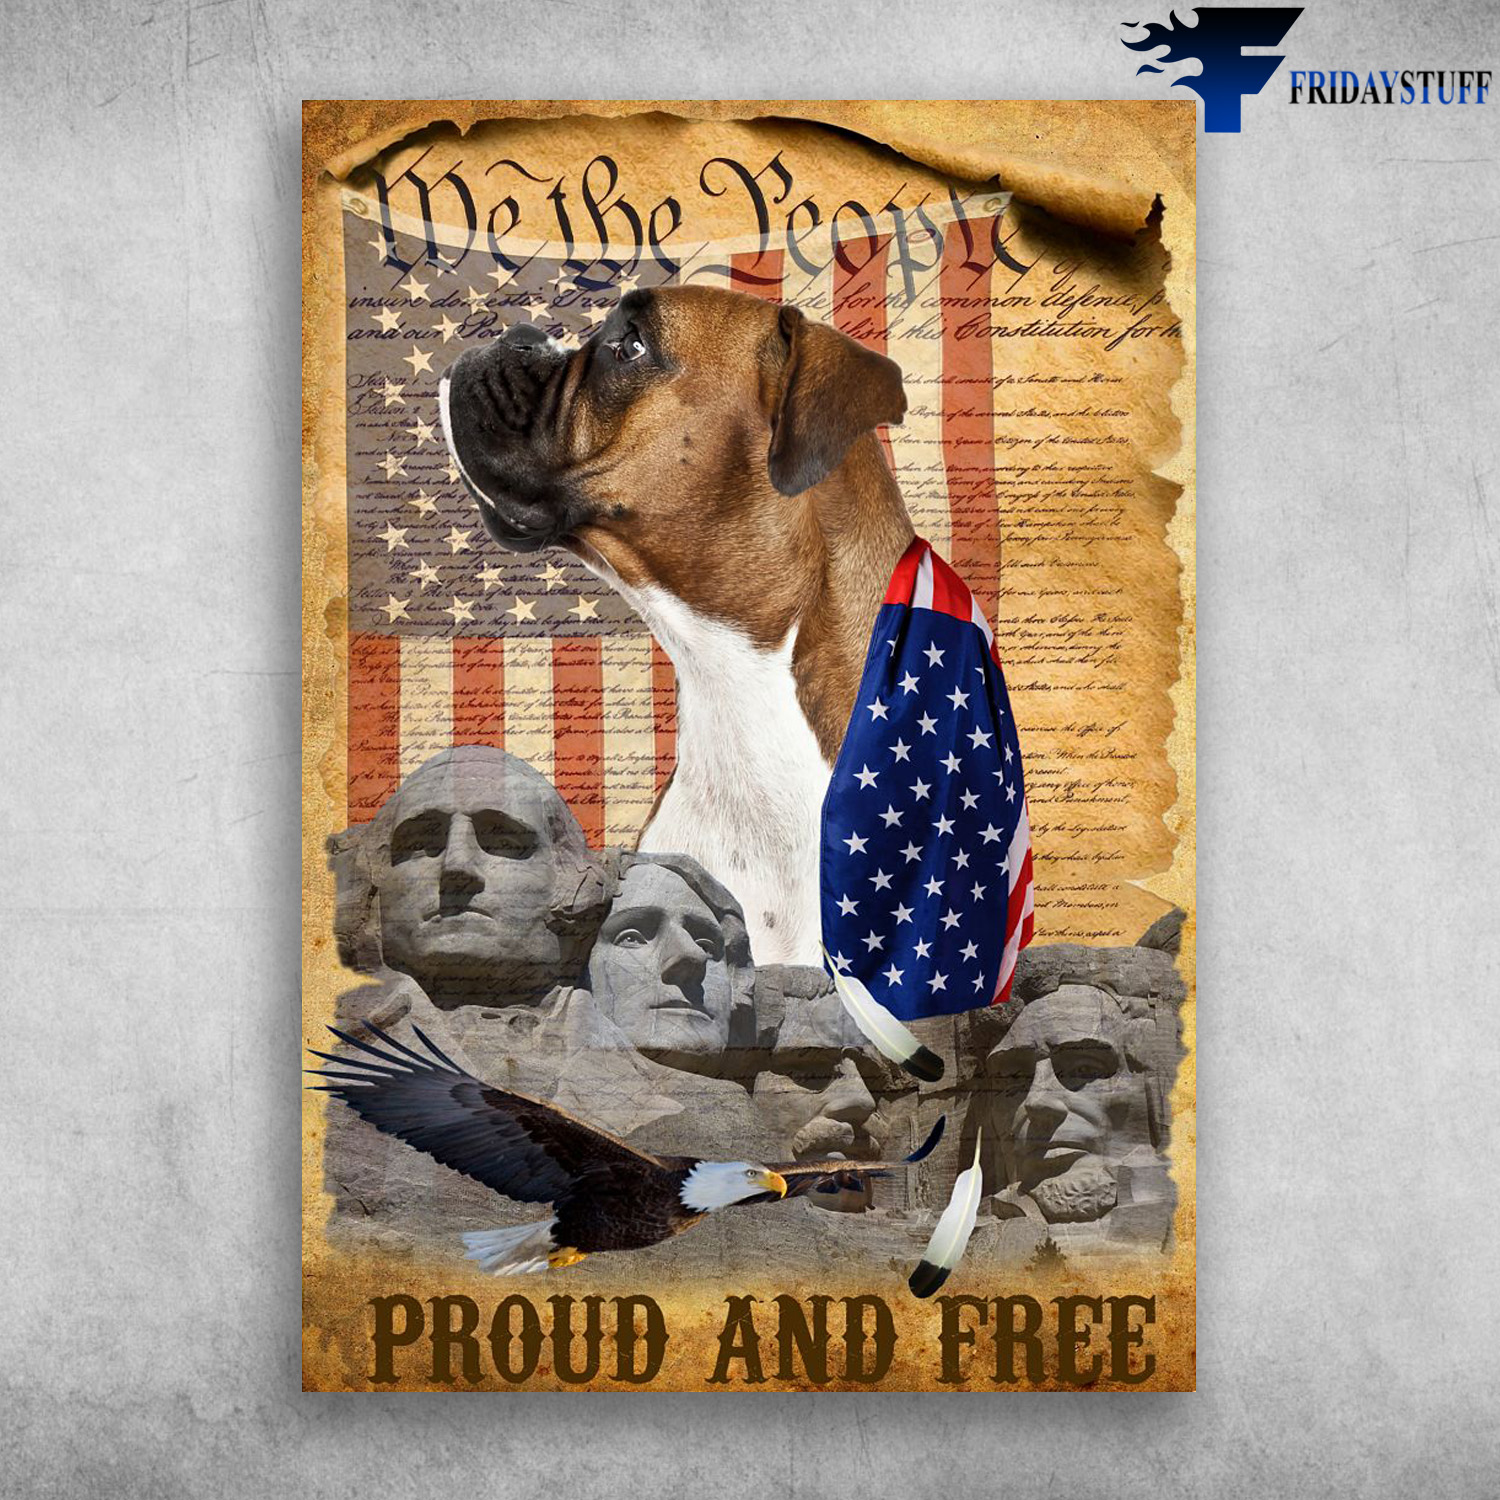 Mount Rushmore, Boxer Dog, American Eagle - Pround And Free